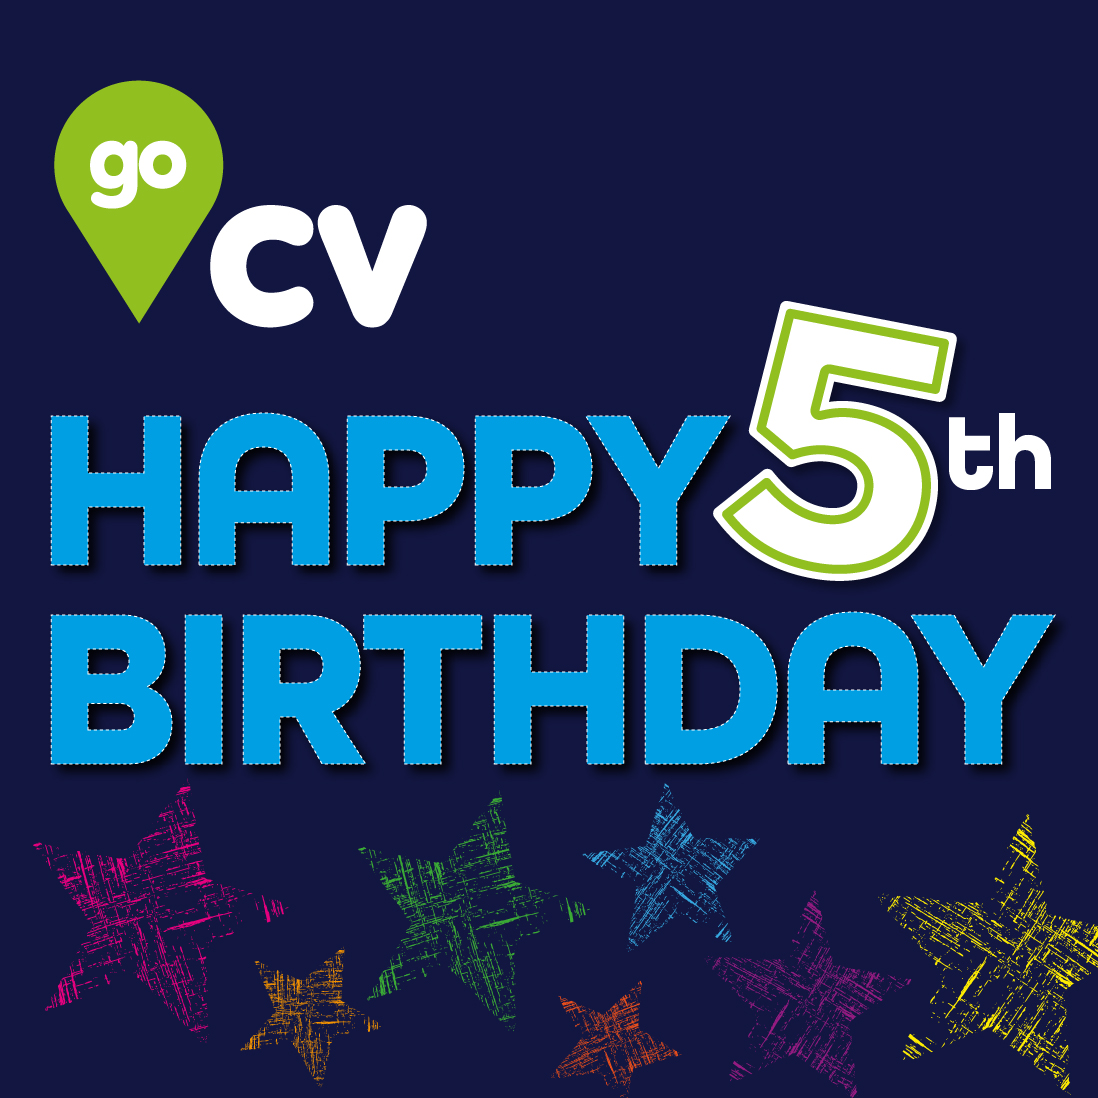 Today is @GoCVcard fifth birthday! 🎉 Thank you to all our partners and over 110,000 members for joining us! The #GoCV app is the best place to find all our latest offers orlo.uk/YRLcm Register and be ready to save with Go CV ⏩ orlo.uk/PBaZj @coventrycc